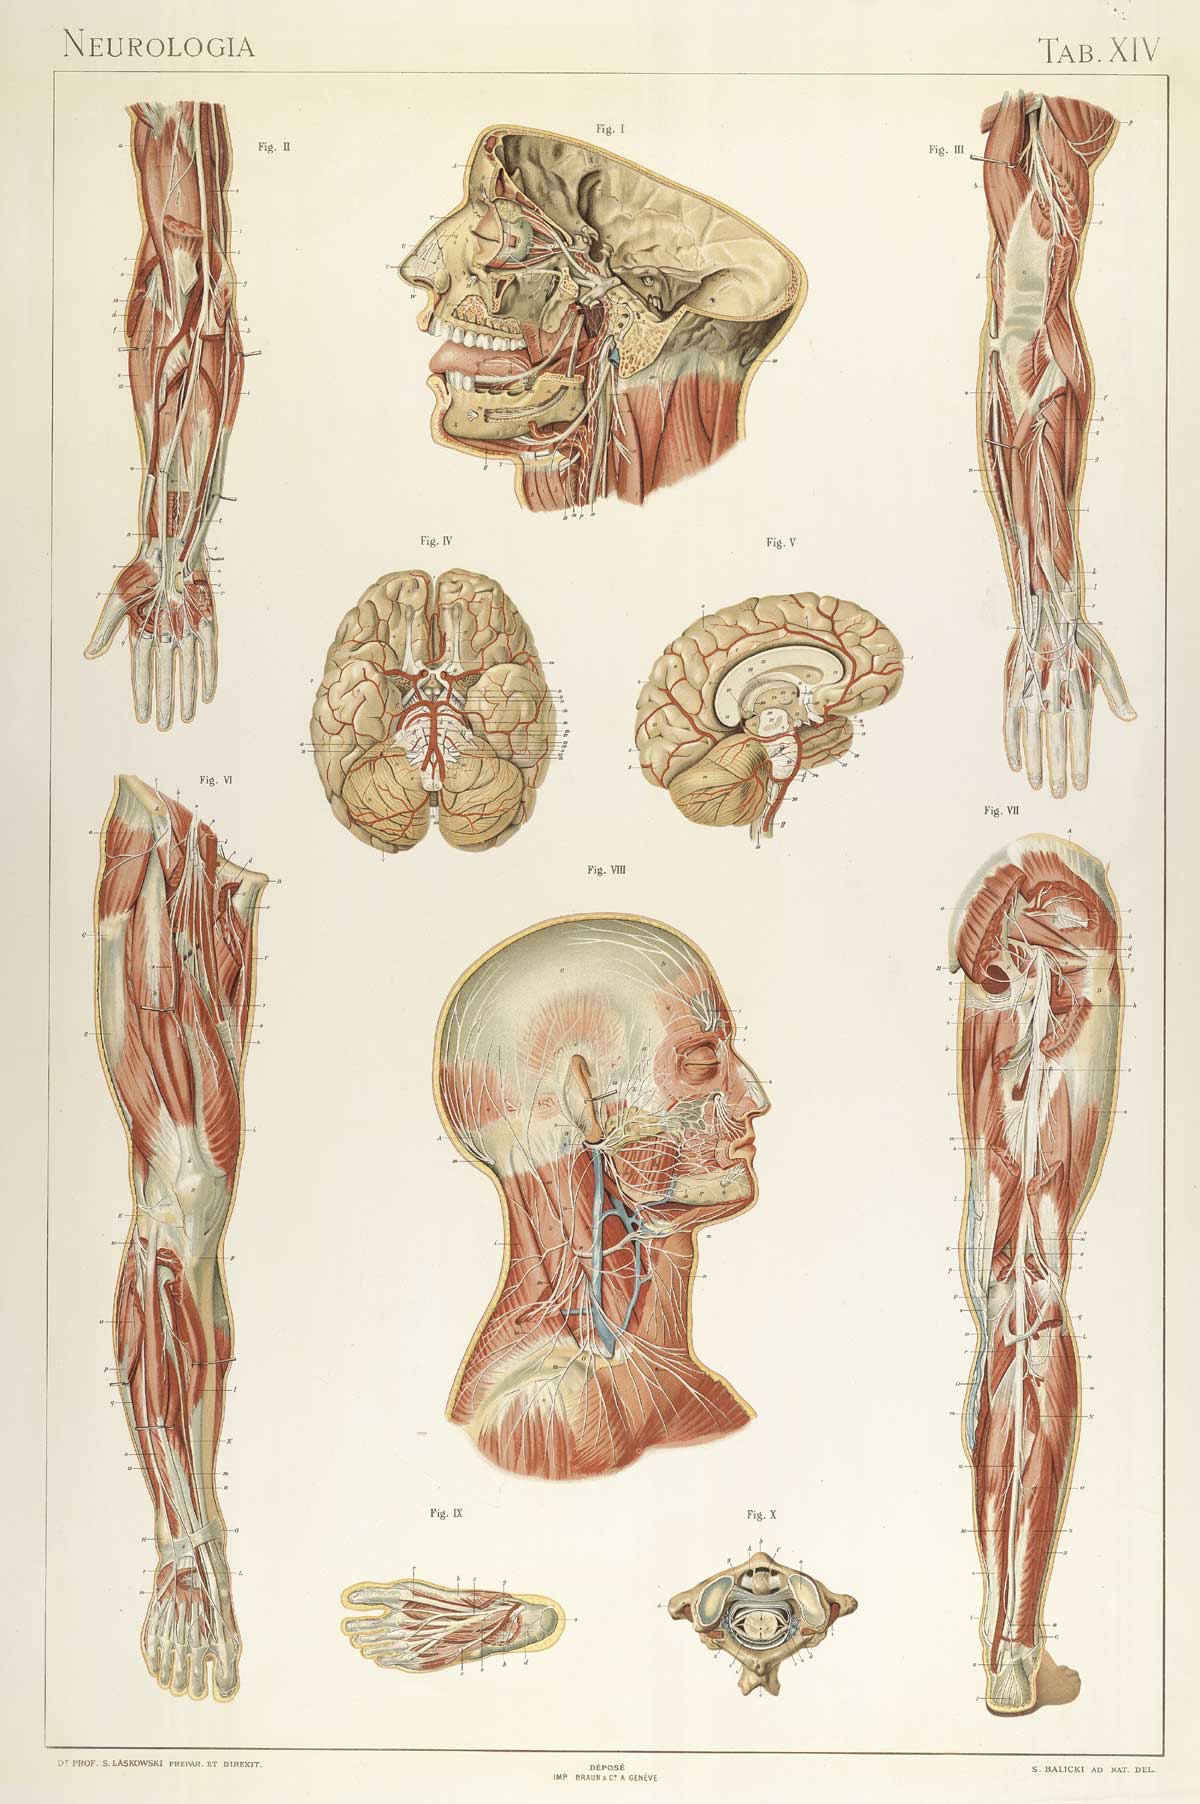 Plate 14 of Sigismond Laskowski's Anatomie normale du corps humain, featuring an various views of individual portions of the nervous system of the body.